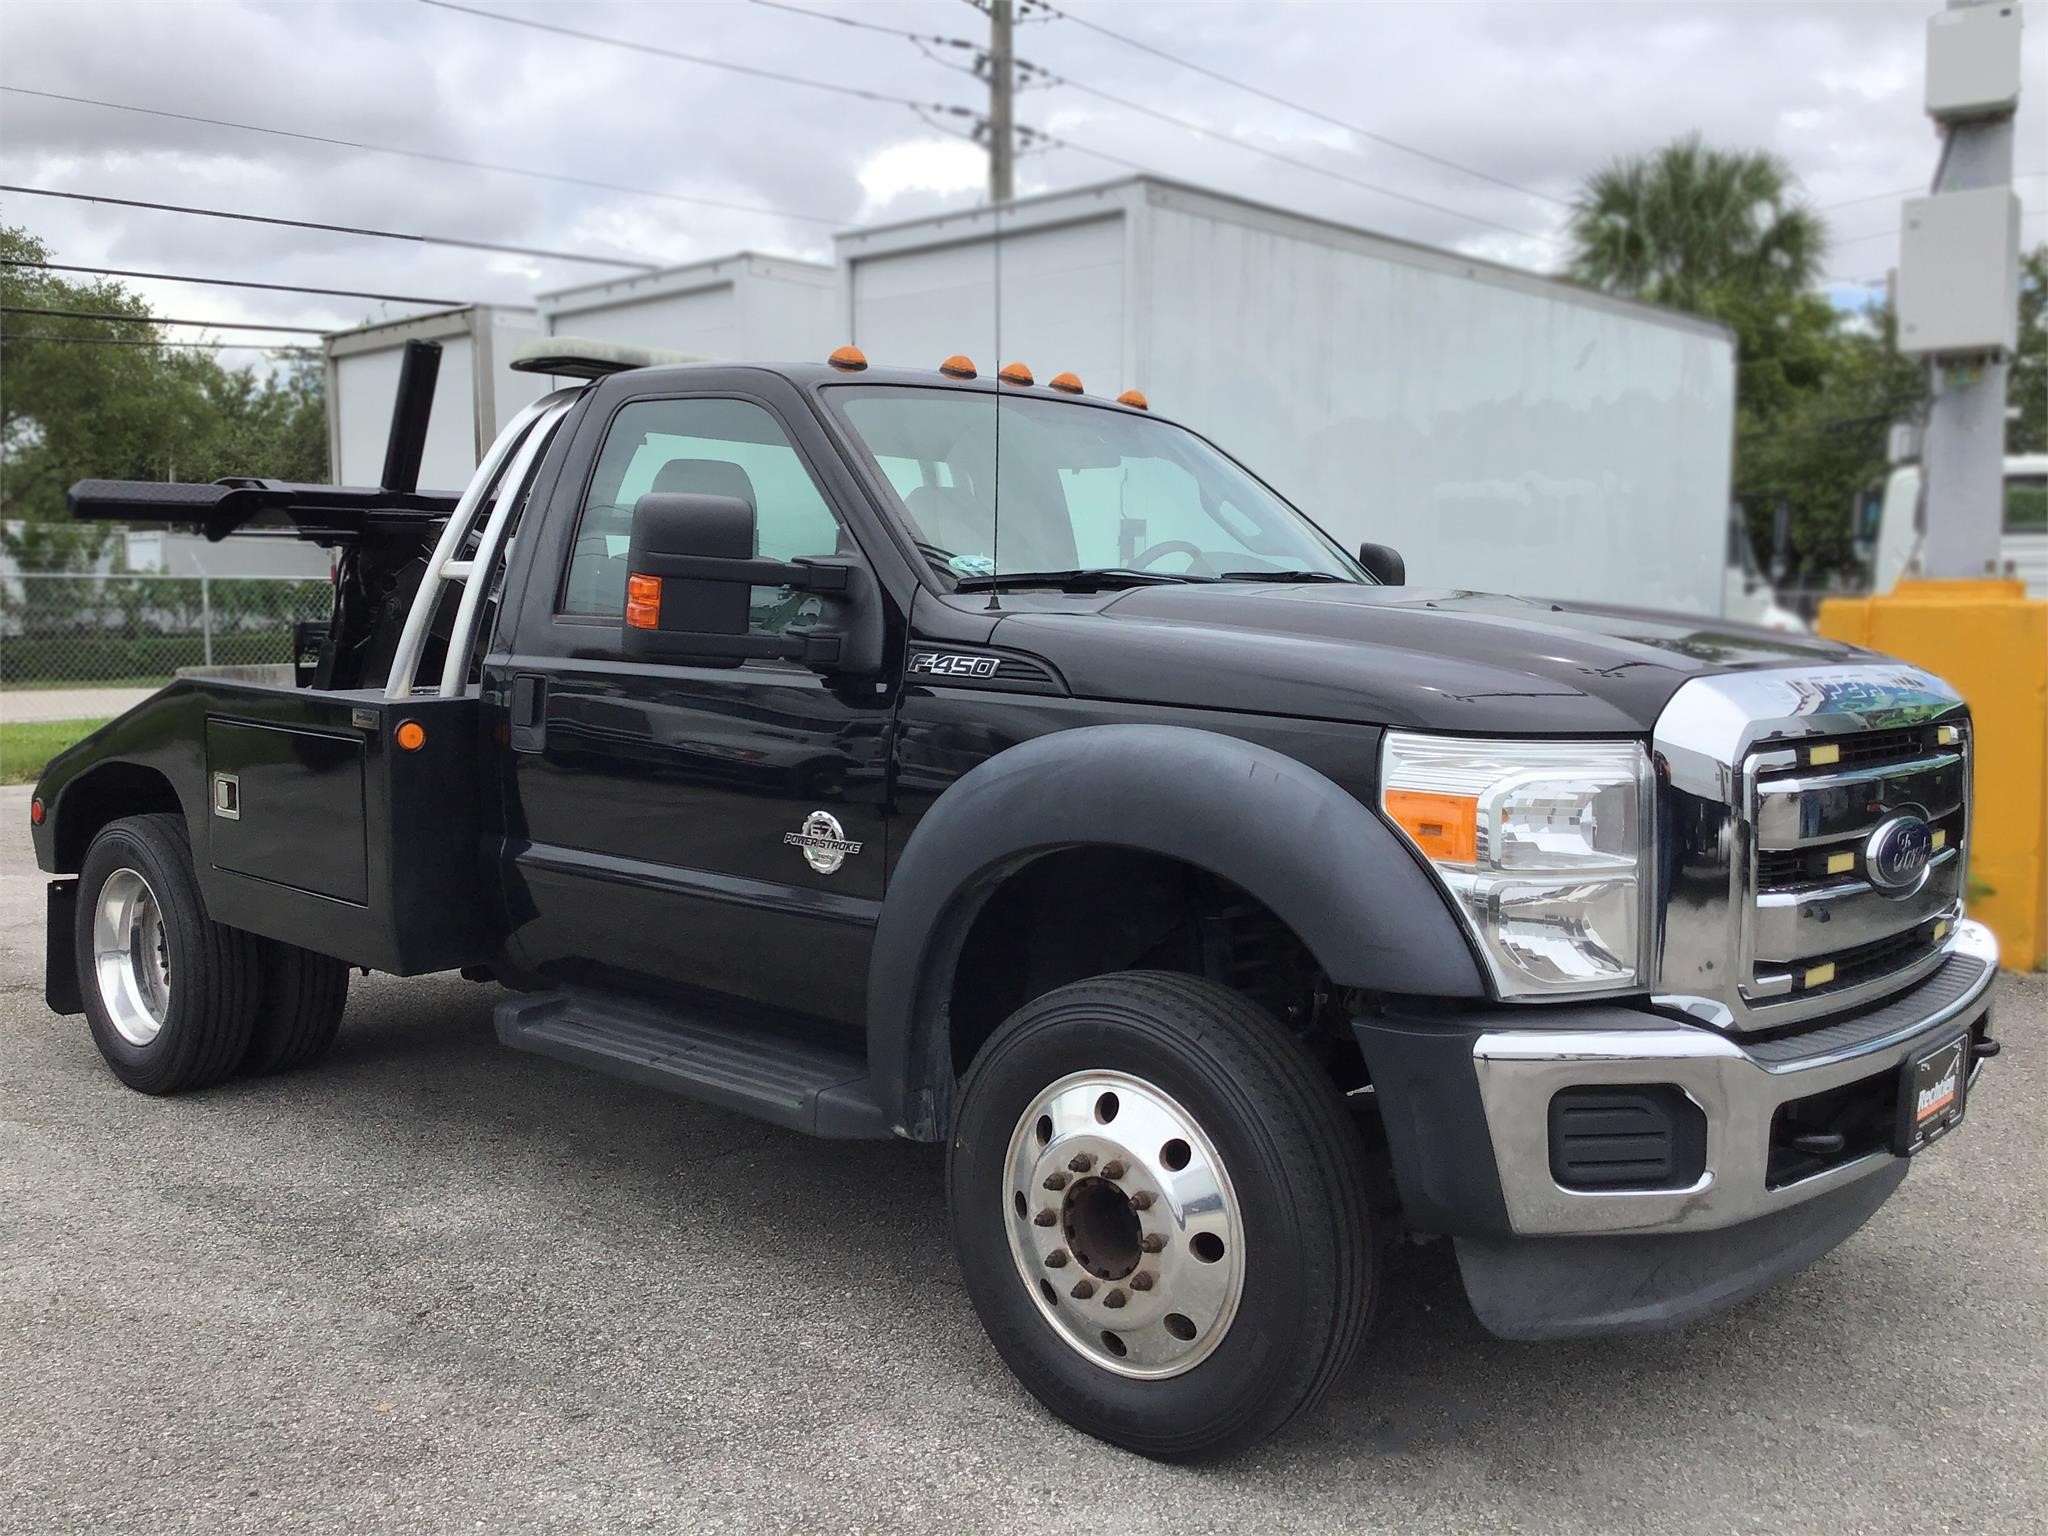 pre owned trucks for sale